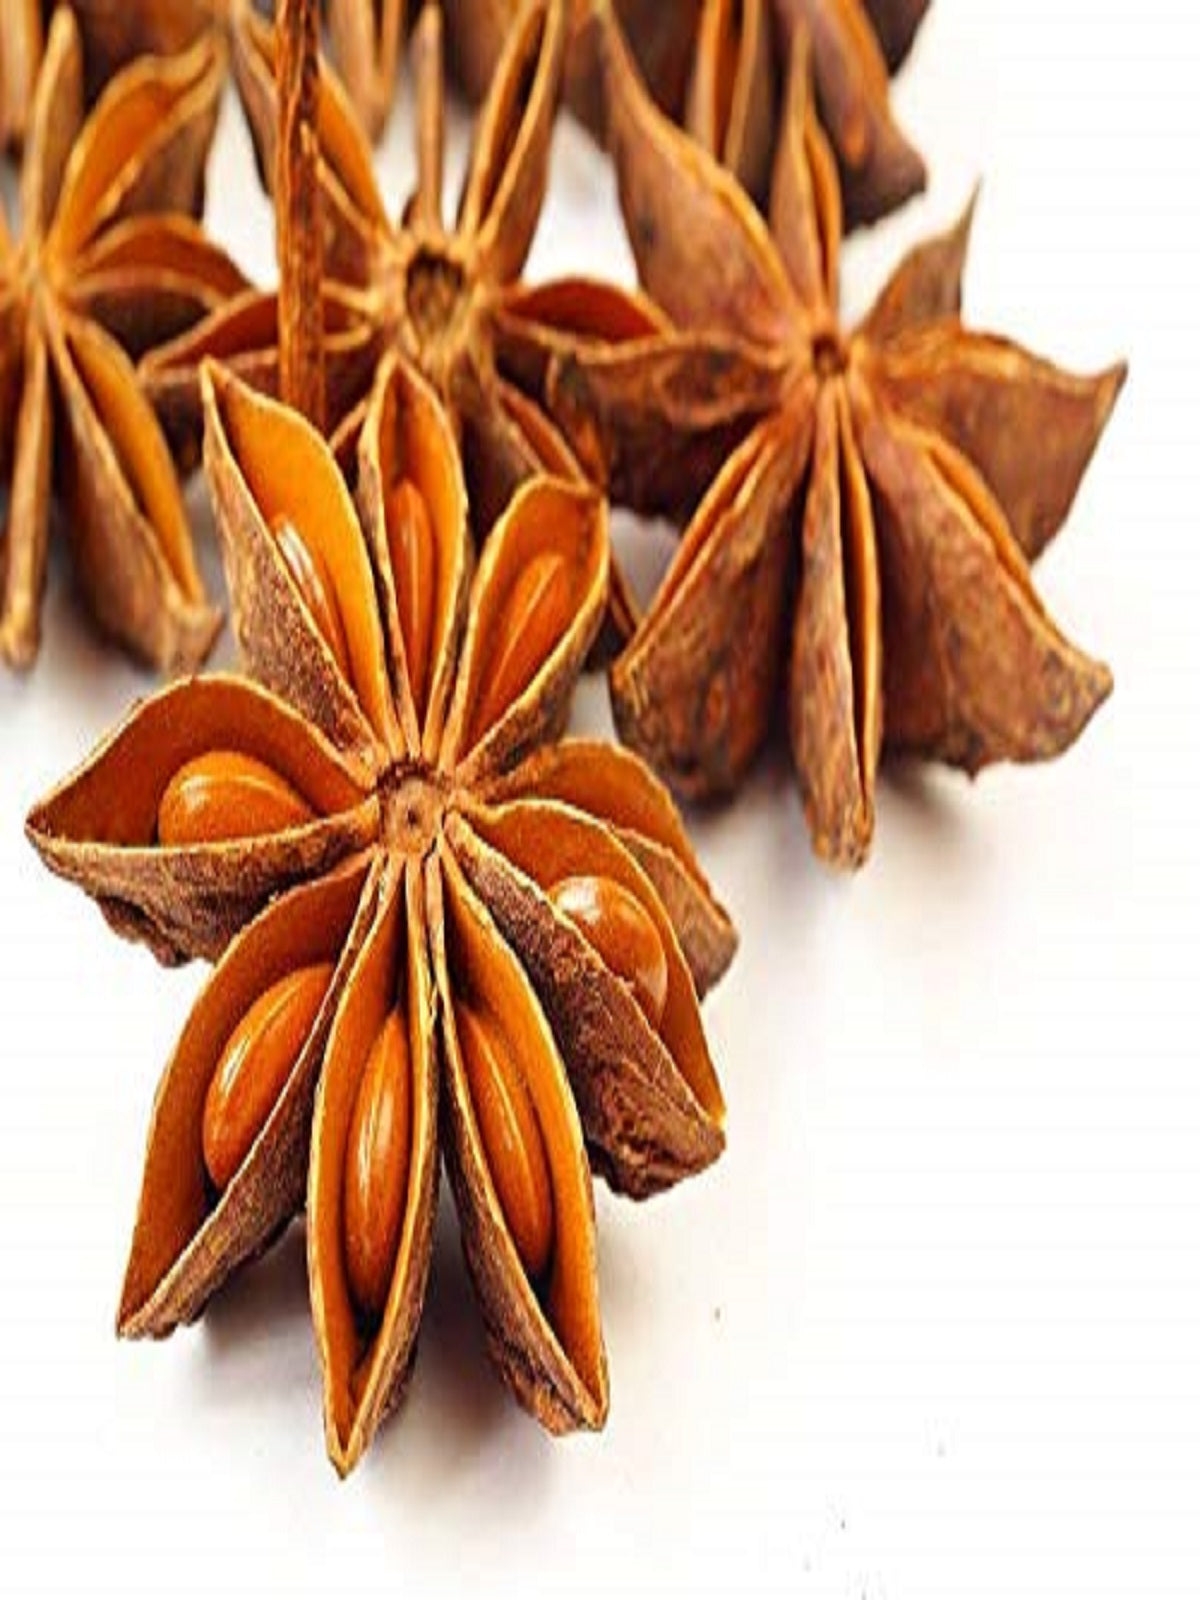 Buy the best quality star fool star anise online at Farmonics